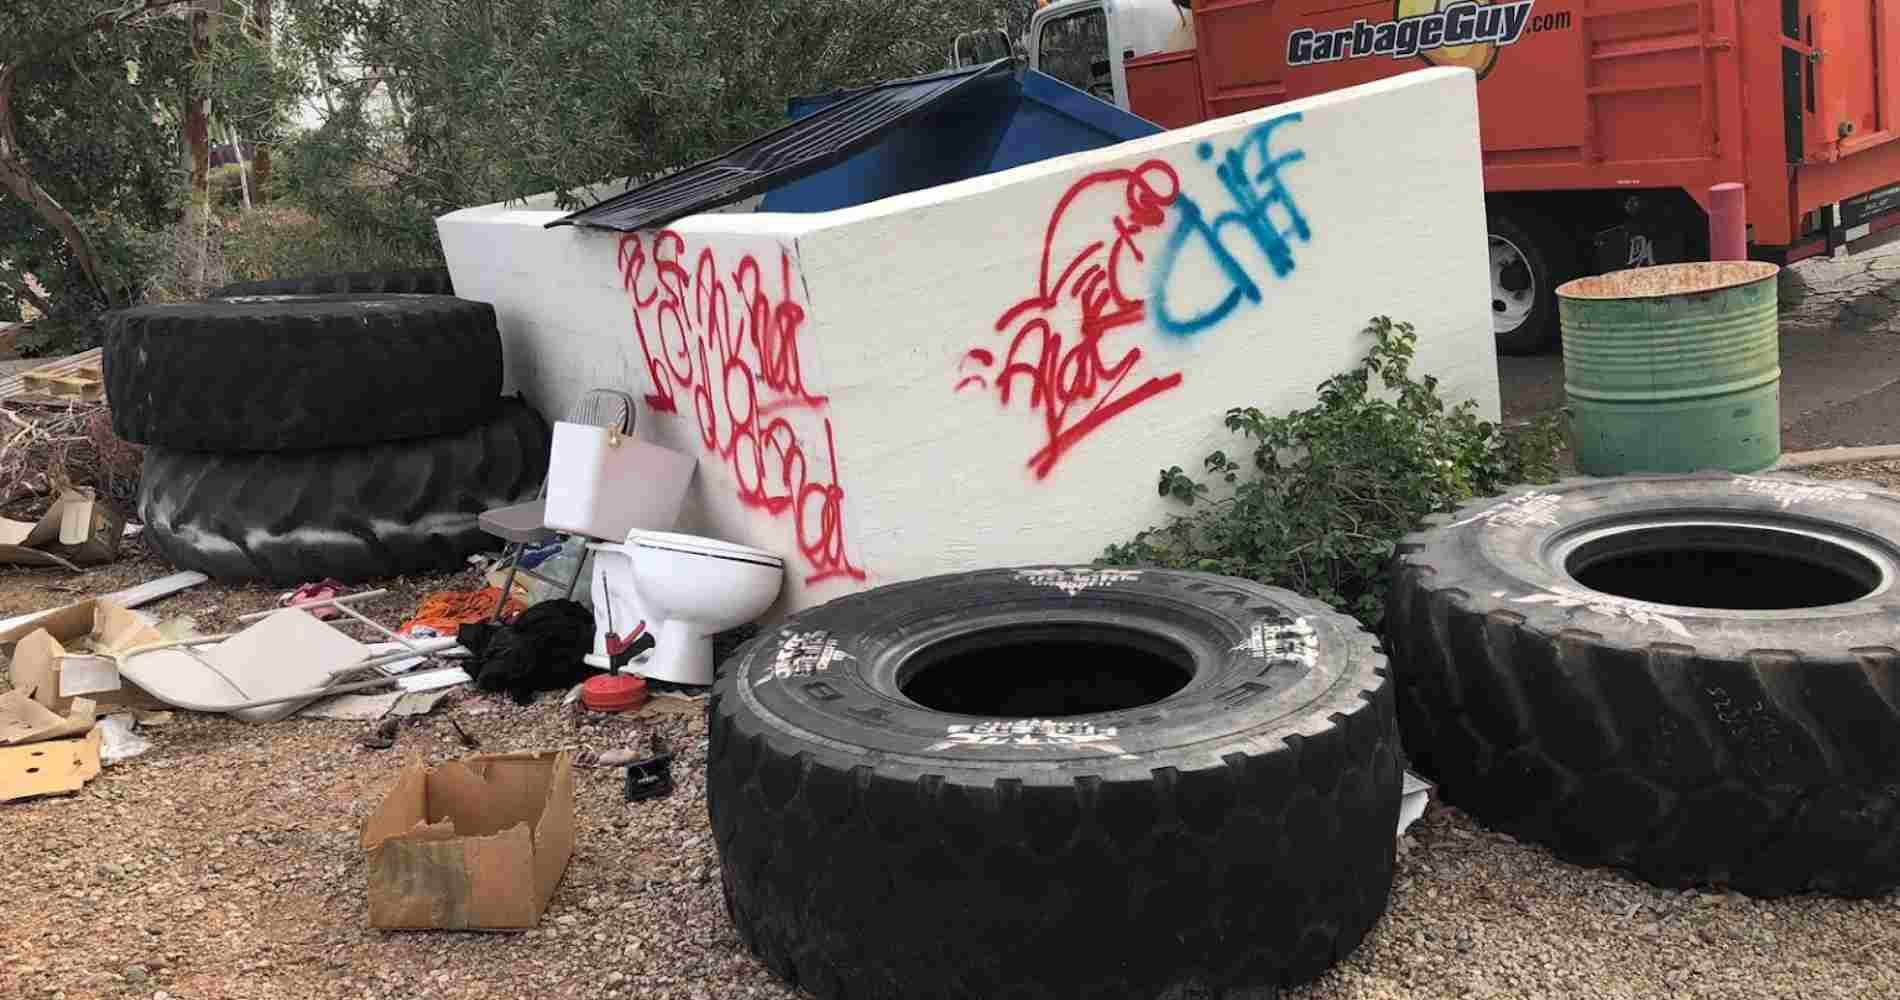 #1 for Tire Disposal in Youngtown, AZ with Over 1200 5-Star Reviews!